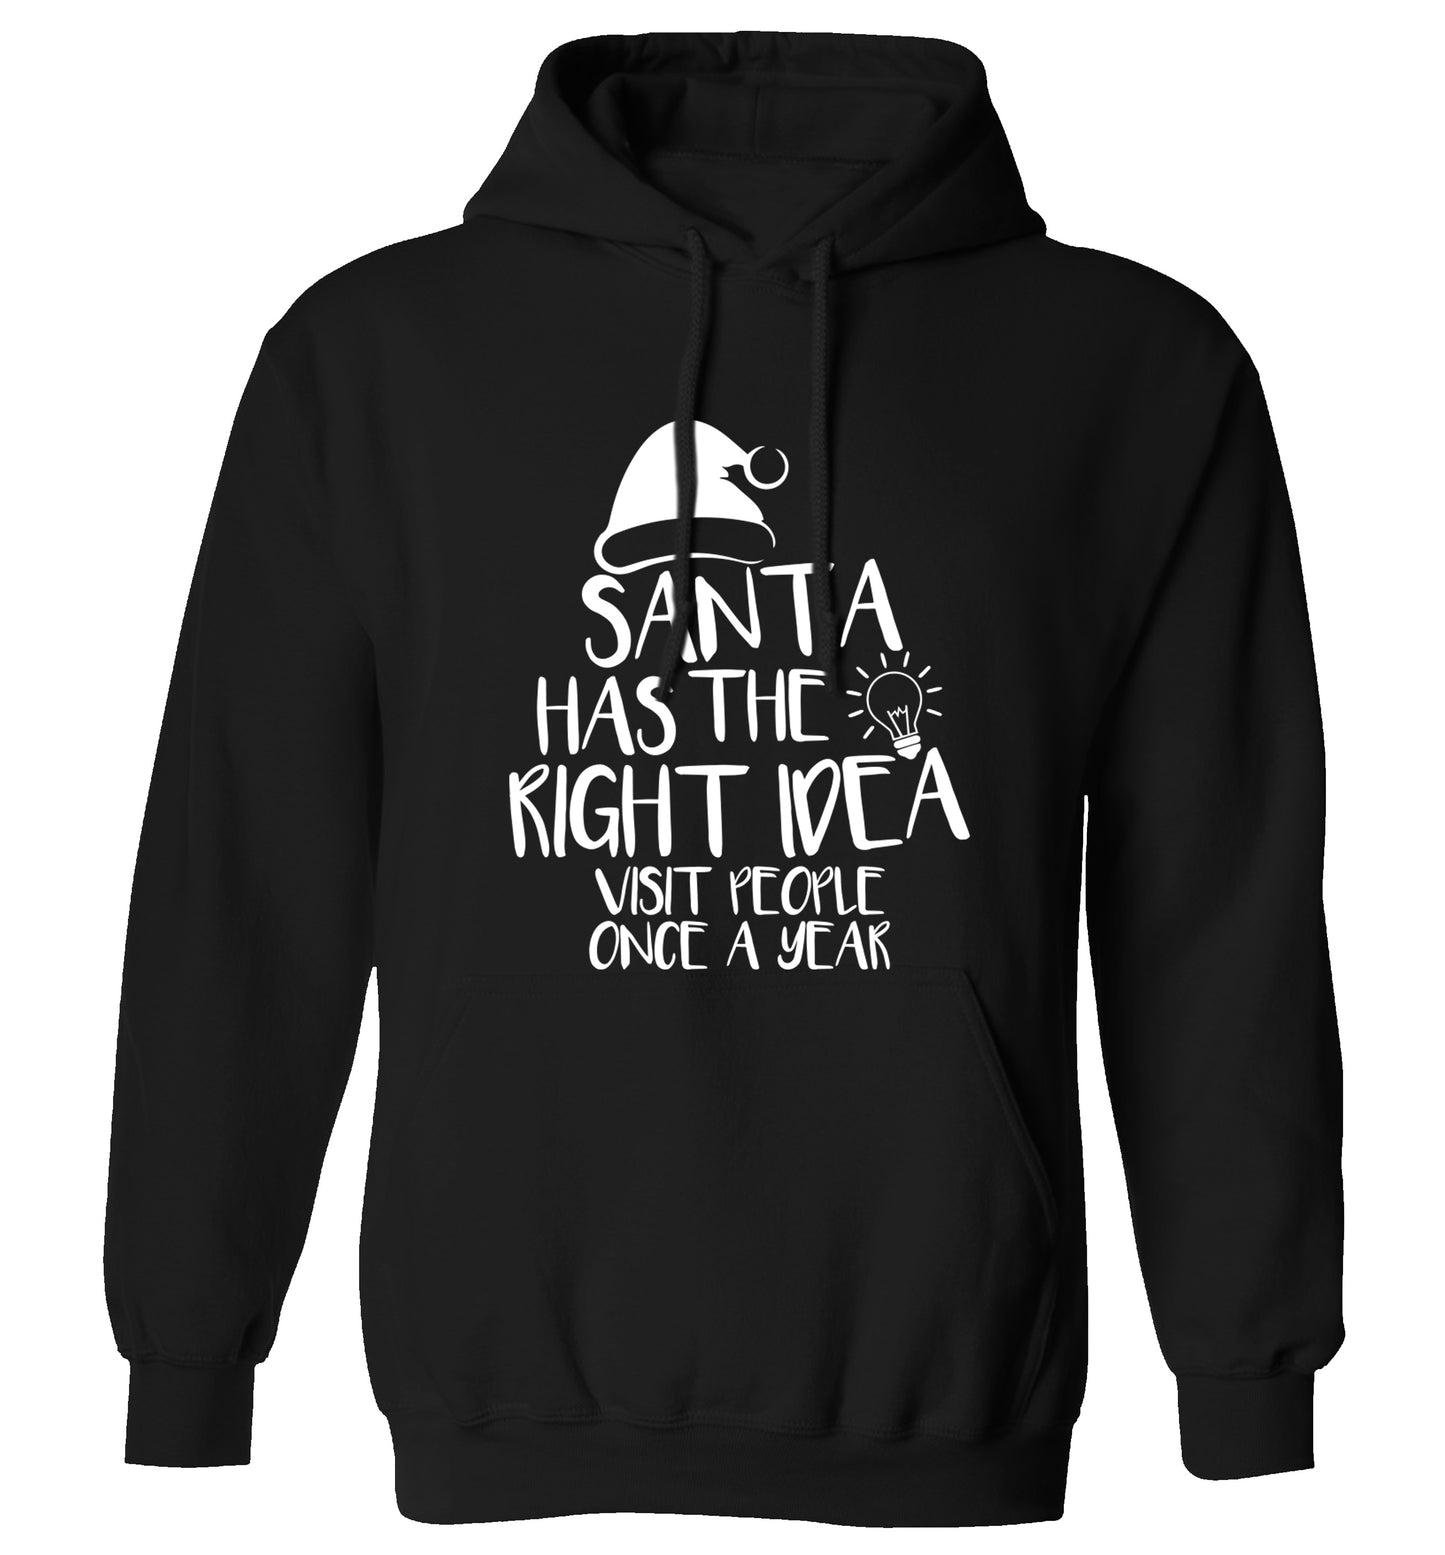 Santa has the right idea visit people once a year adults unisex black hoodie 2XL